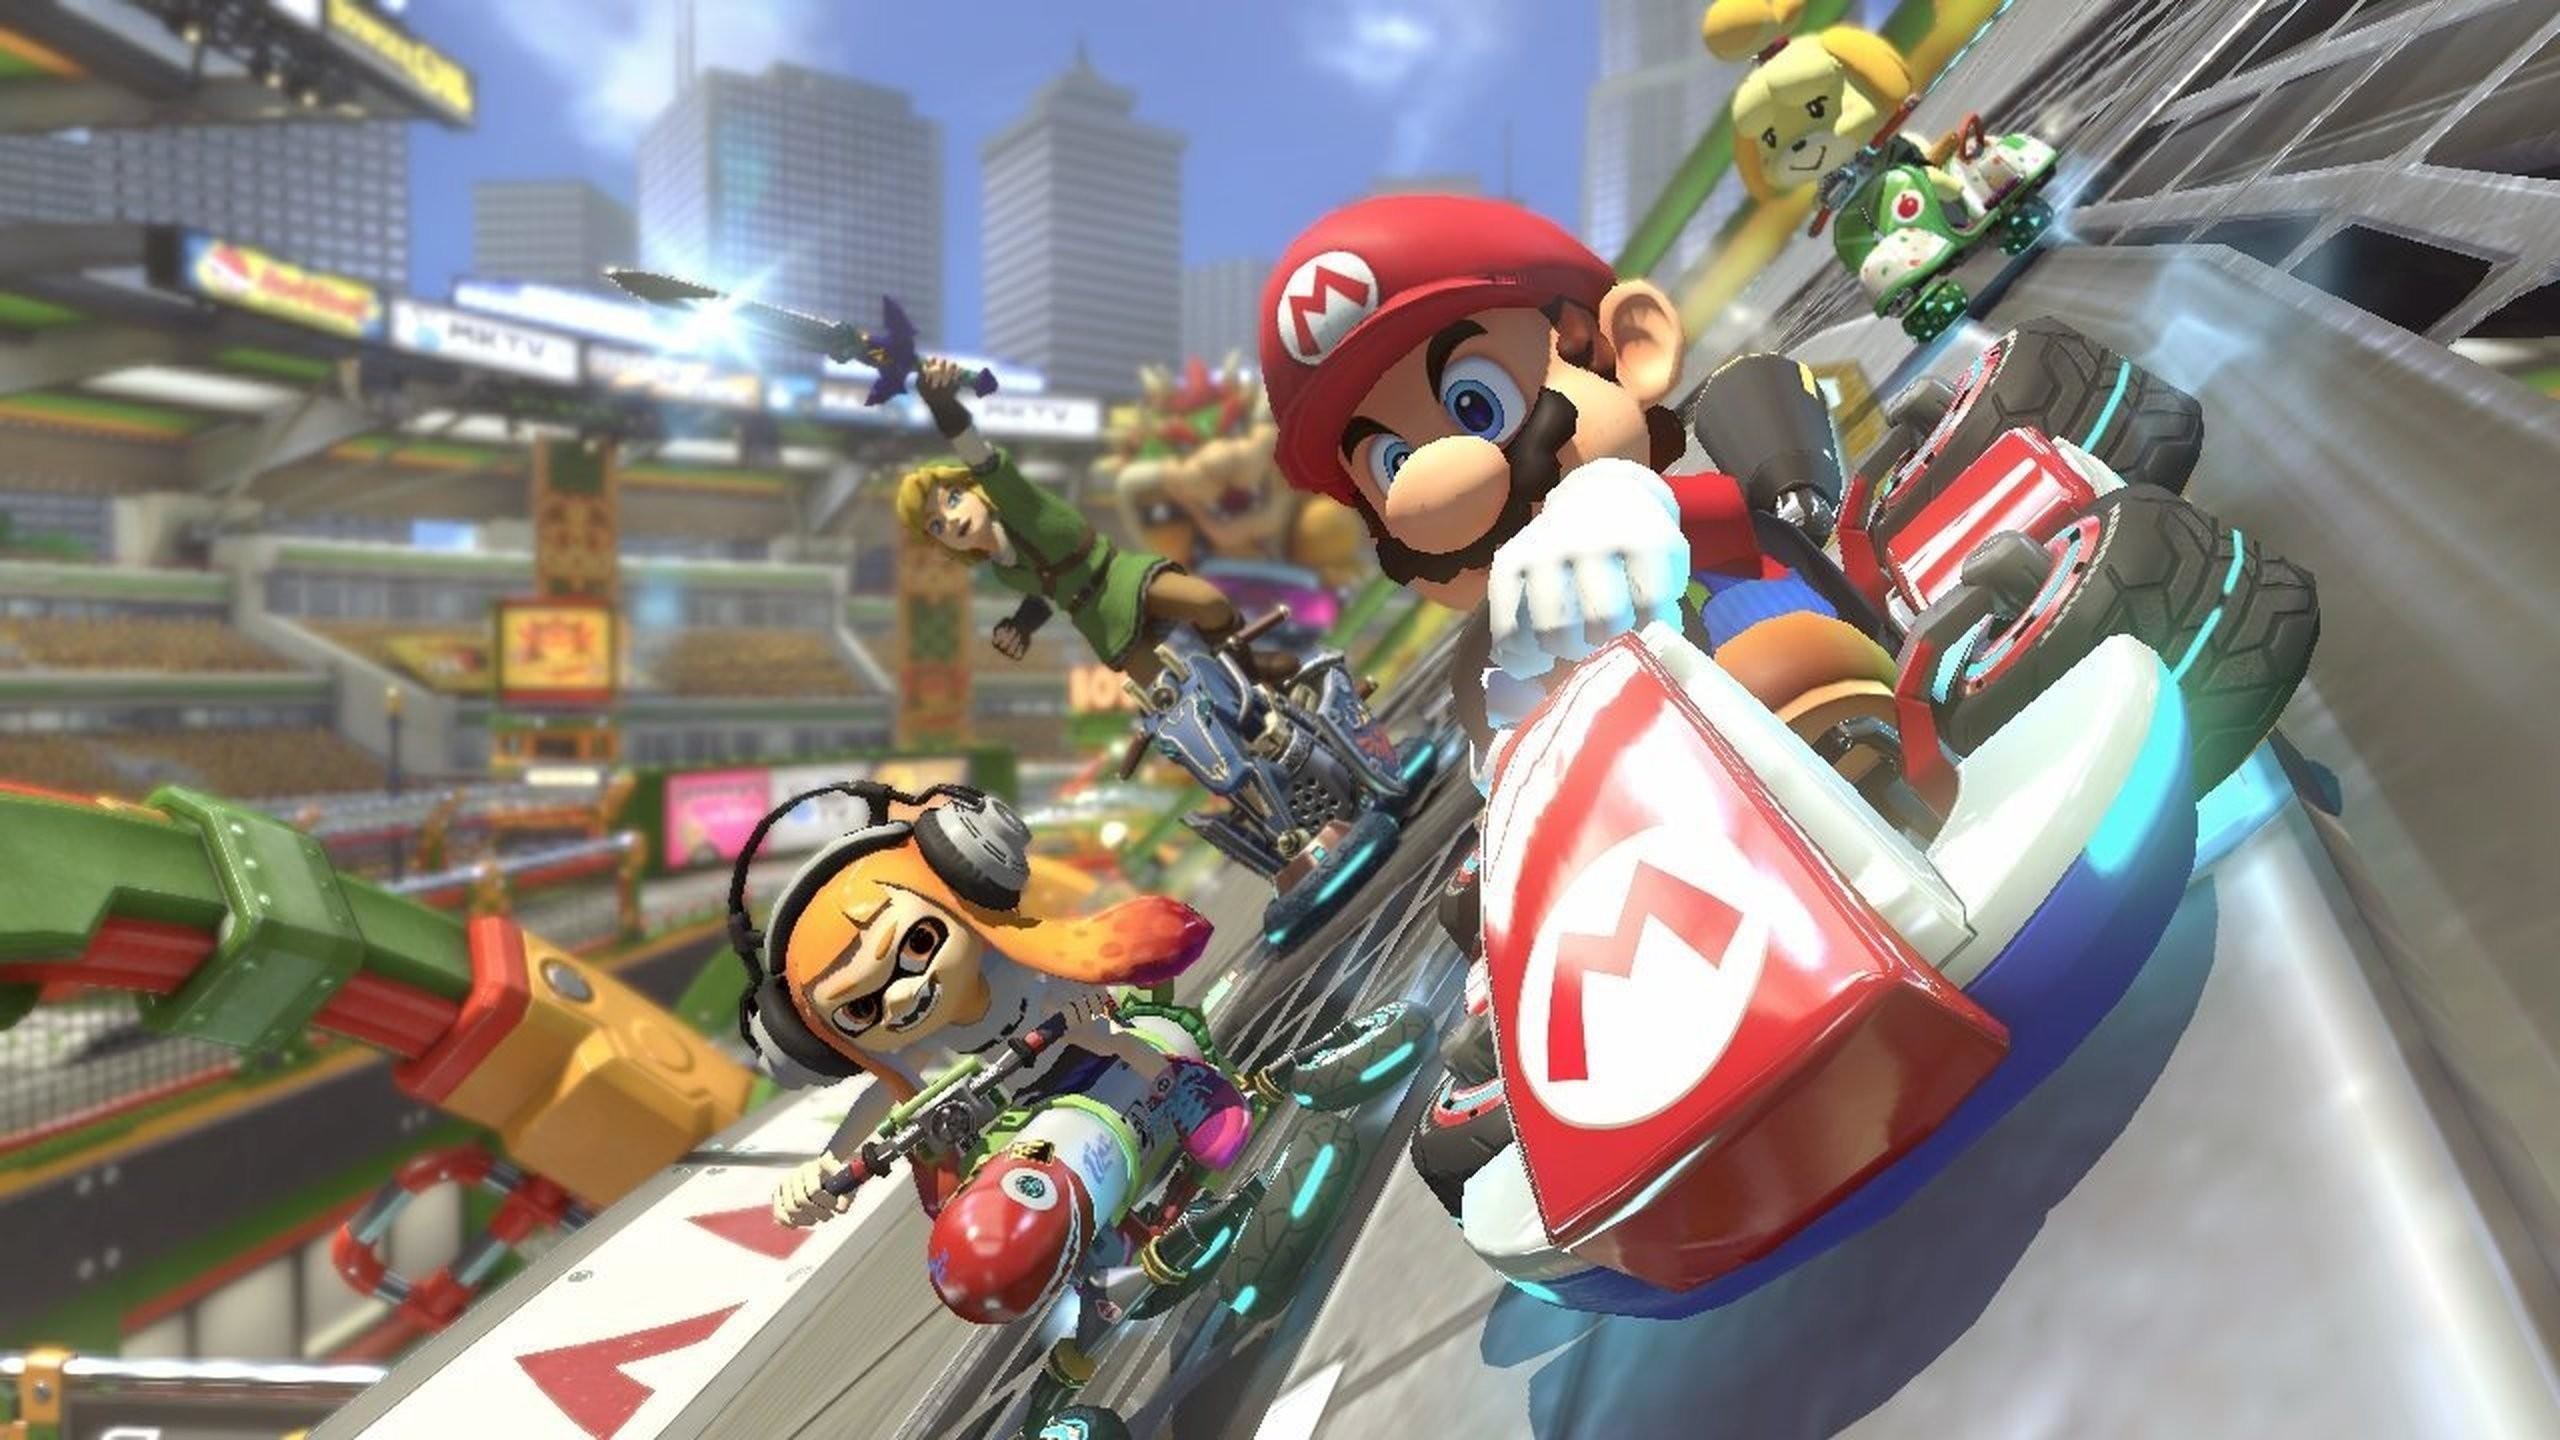 2560x1440 'Mario Kart 8 Deluxe' Ties 'Persona 5' For Second-Best Reviewed Game Of 2017